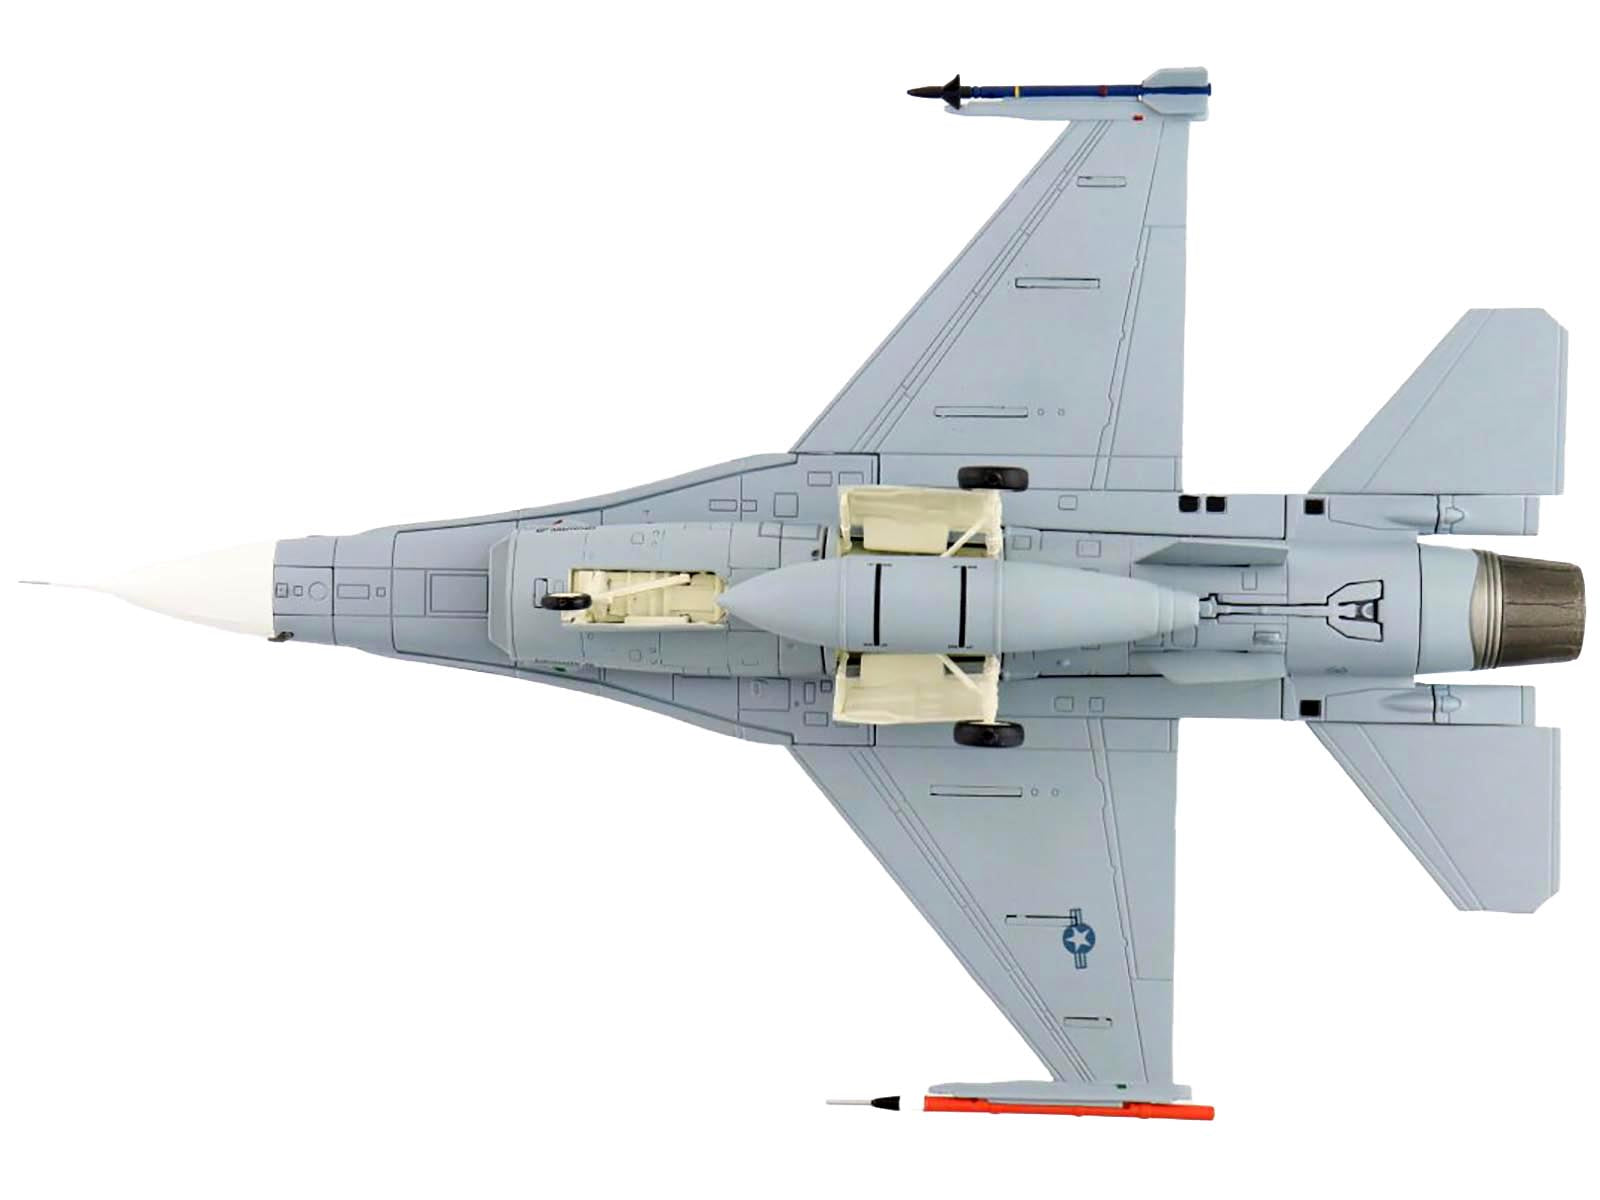 Lockheed F-16B Fighting Falcon Fighter Aircraft "Top Gun 90th Anniversary of Naval Aviation NSAWC" United States Navy "Air Power Series" 1/72 Diecast Model by Hobby Master